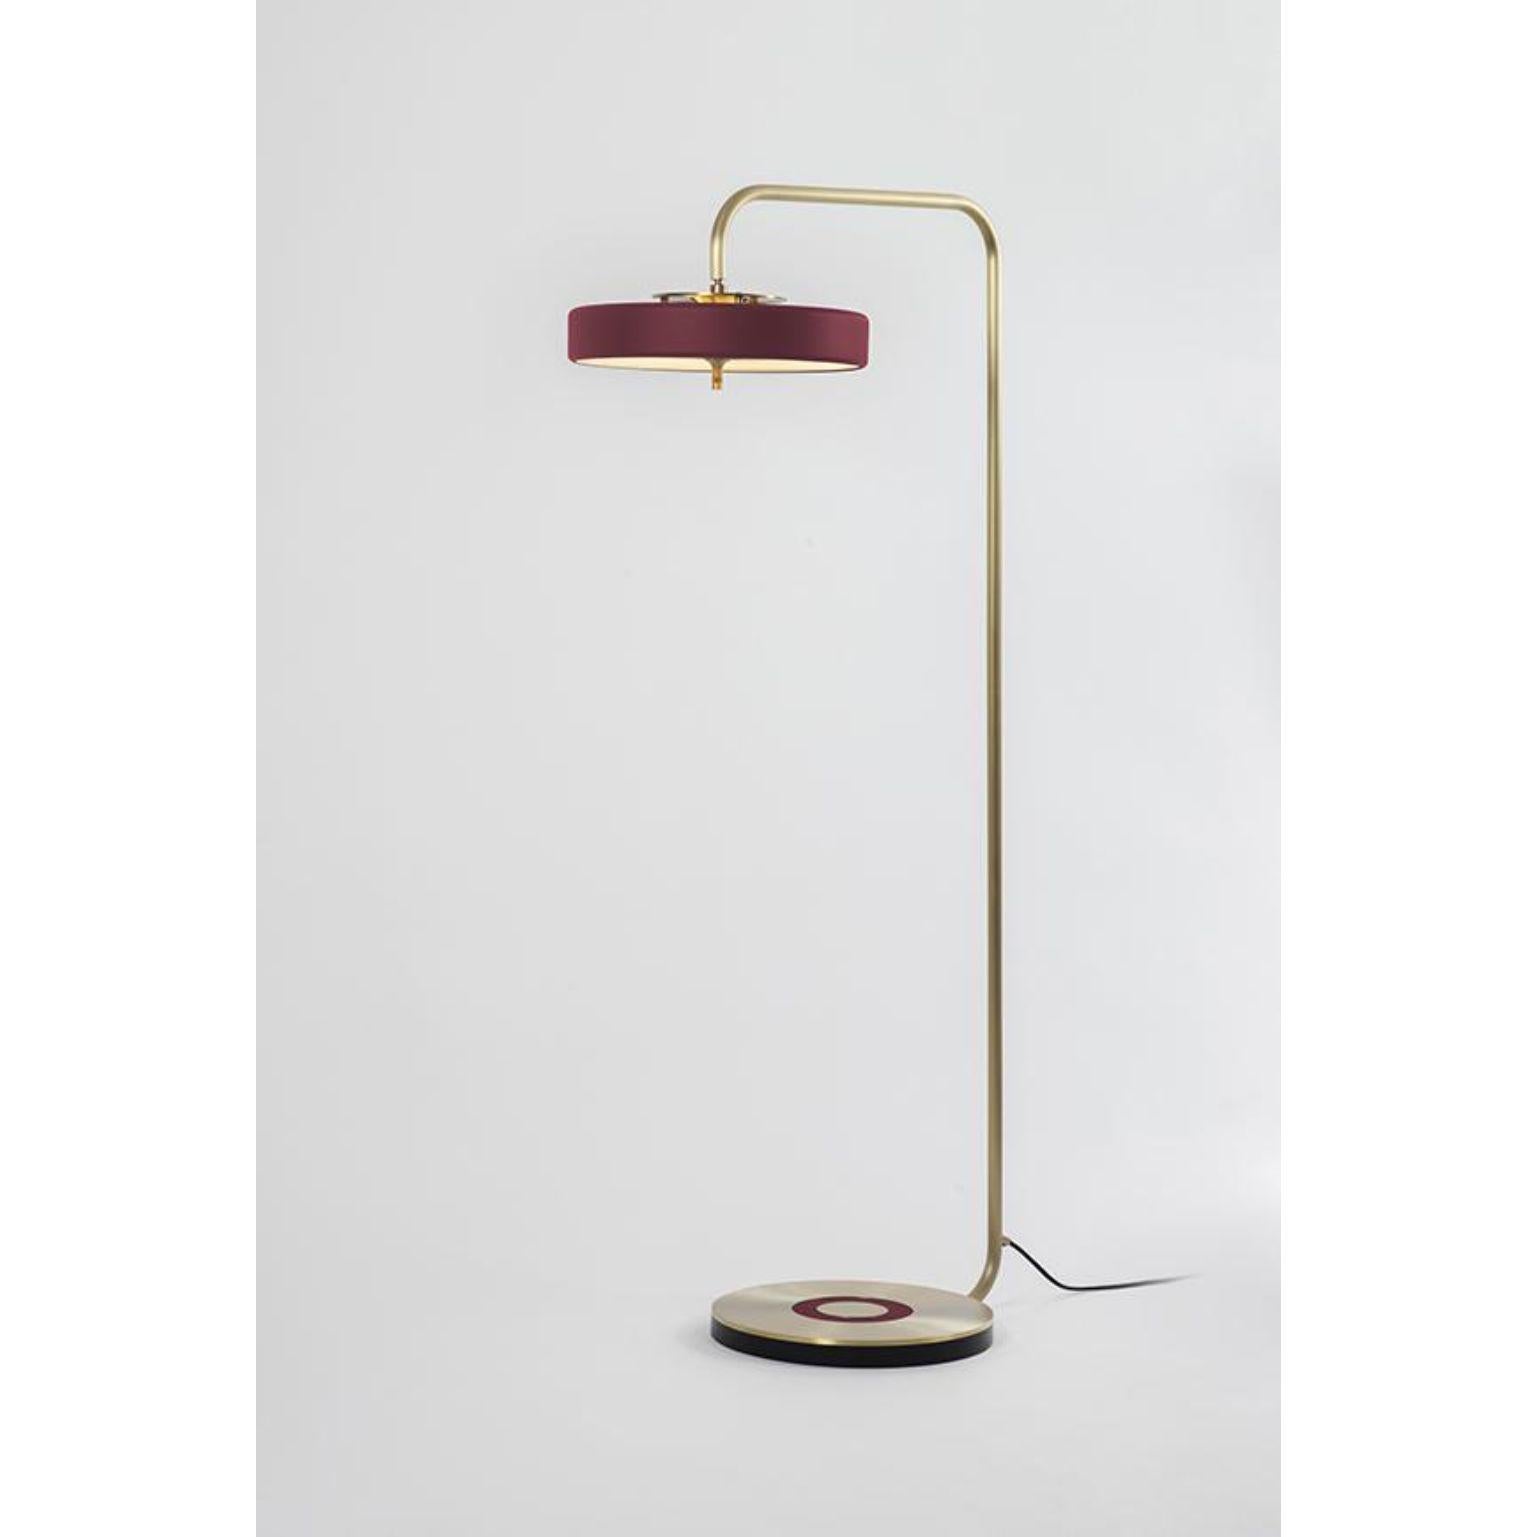 Revolve floor lamp - polished brass - oxblood by Bert Frank
Dimensions: 130 x 35.4 x 9.3 cm
Materials: Brass, steel

Also Available in brushed brass
When Adam Yeats and Robbie Llewellyn founded Bert Frank in 2013 it was a meeting of minds and the